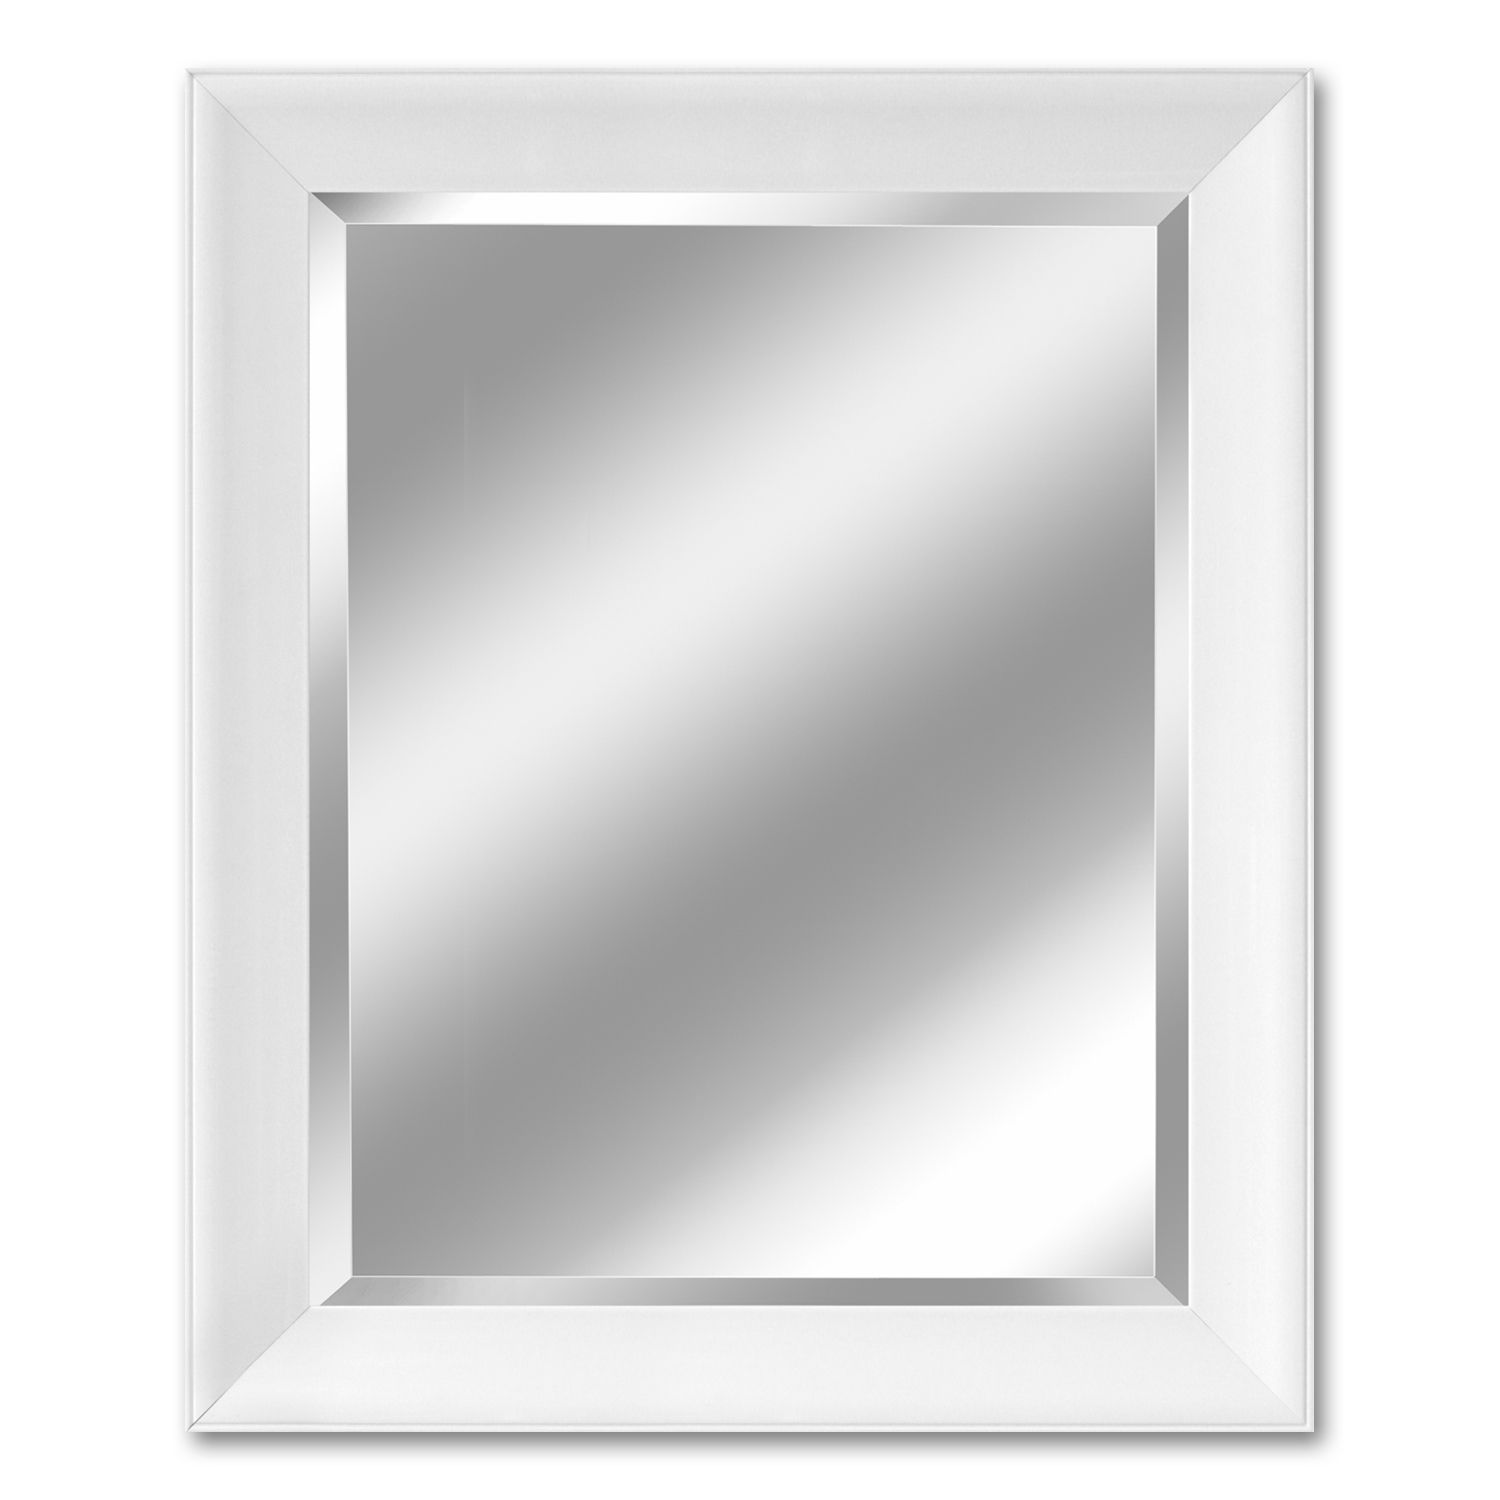 Image for Head West White Contemporary Beveled Wall Mirror at Kohl's.